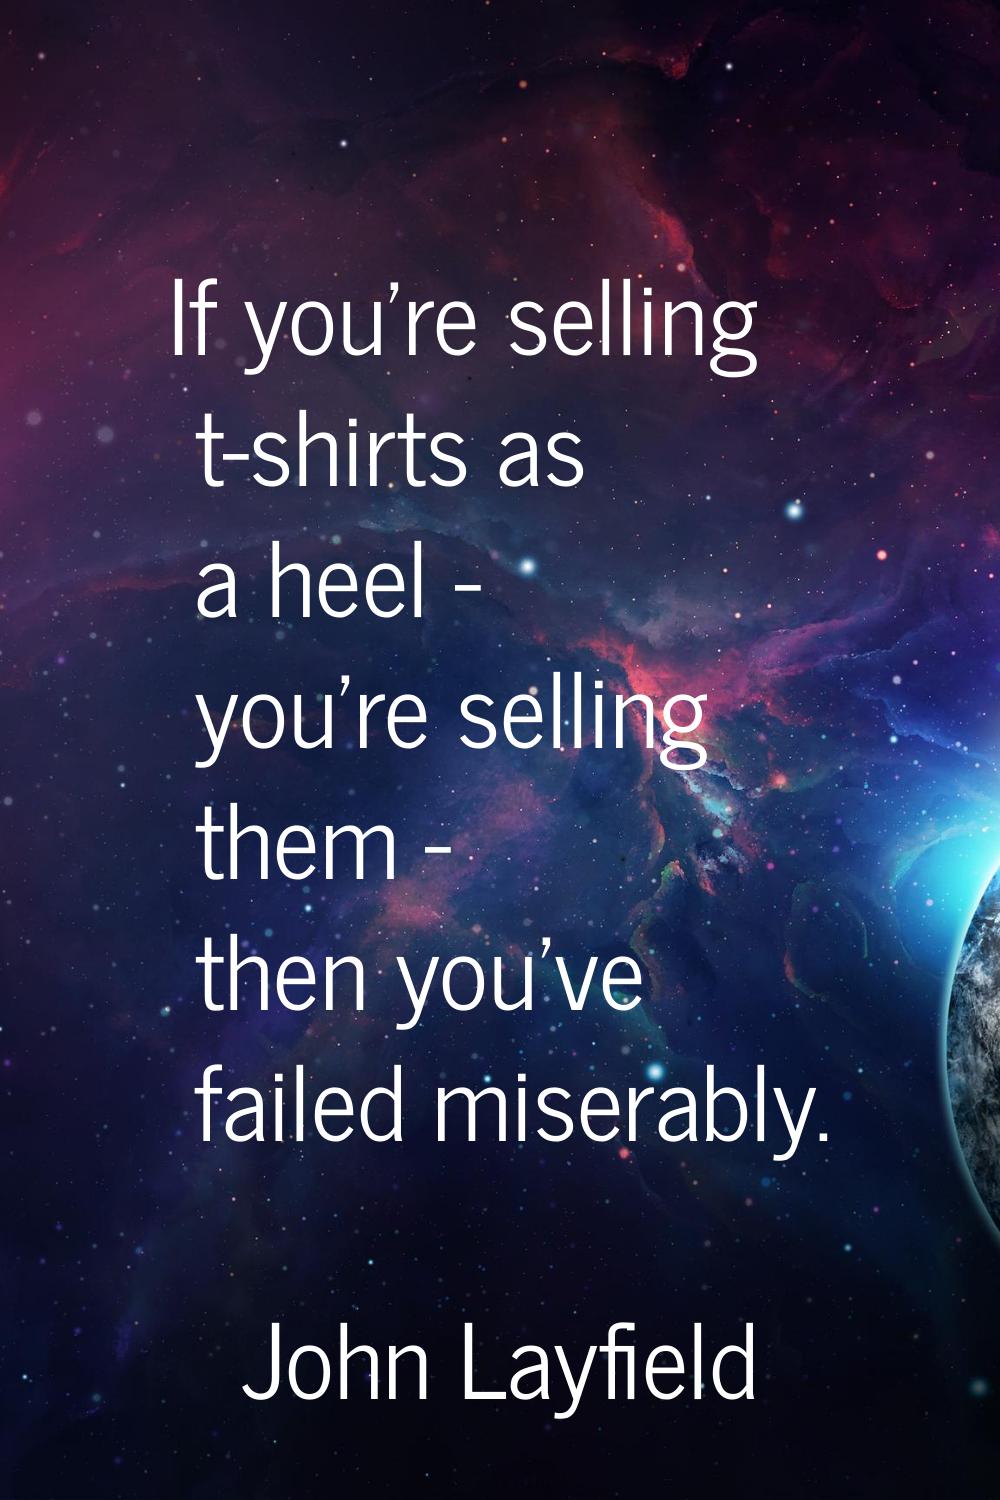 If you're selling t-shirts as a heel - you're selling them - then you've failed miserably.